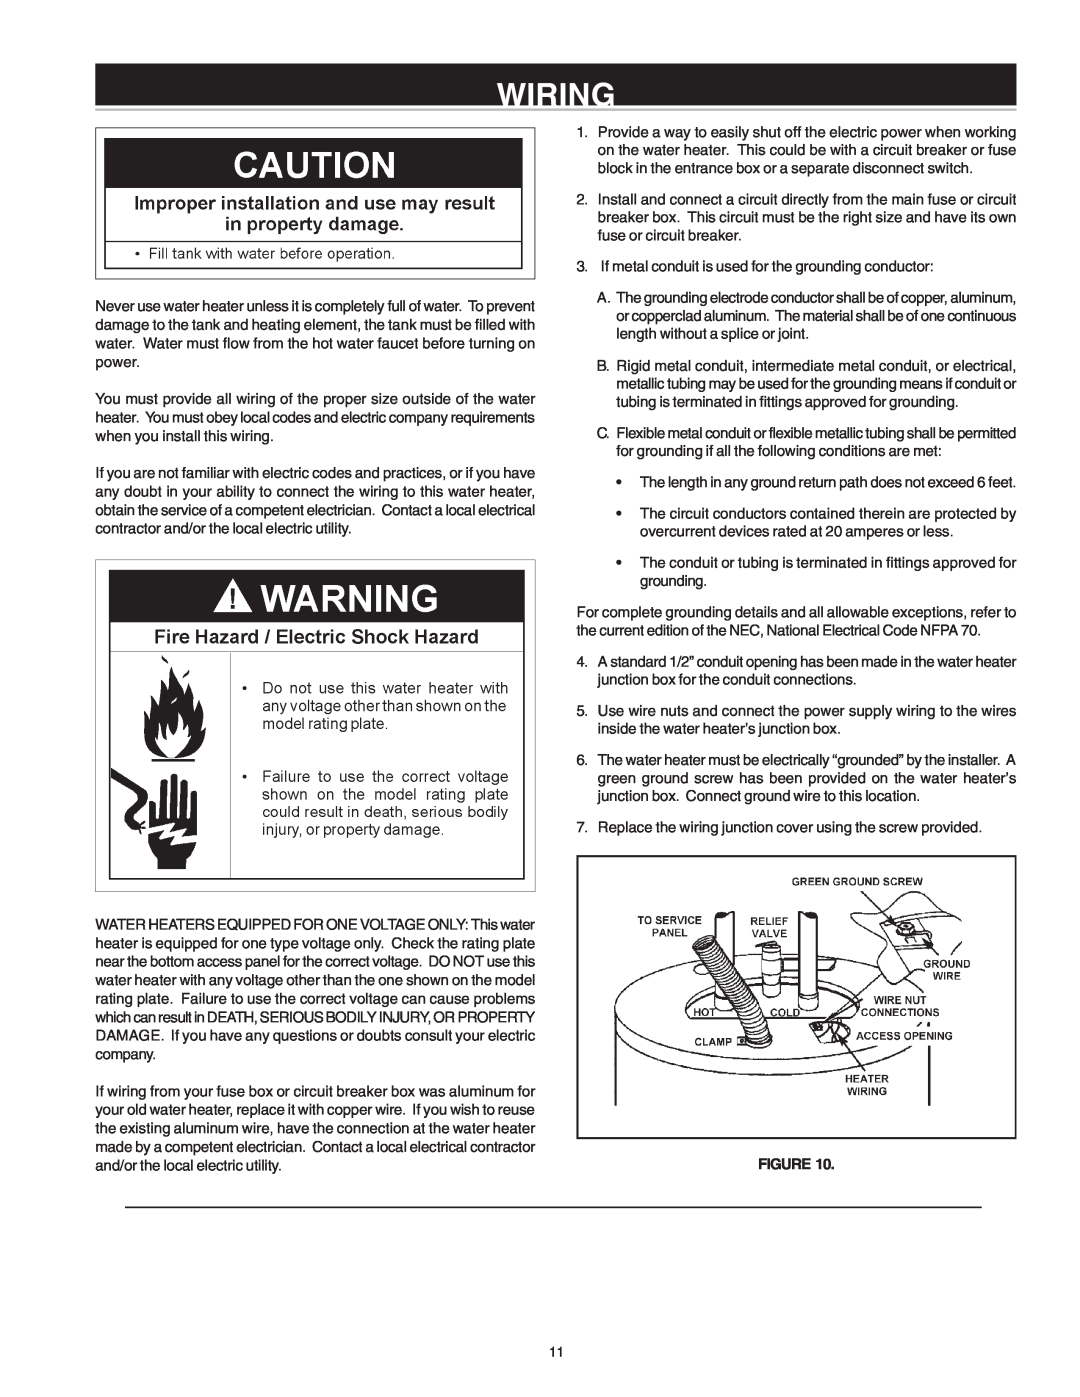 Reliance Water Heaters 184735-000 instruction manual Wiring 